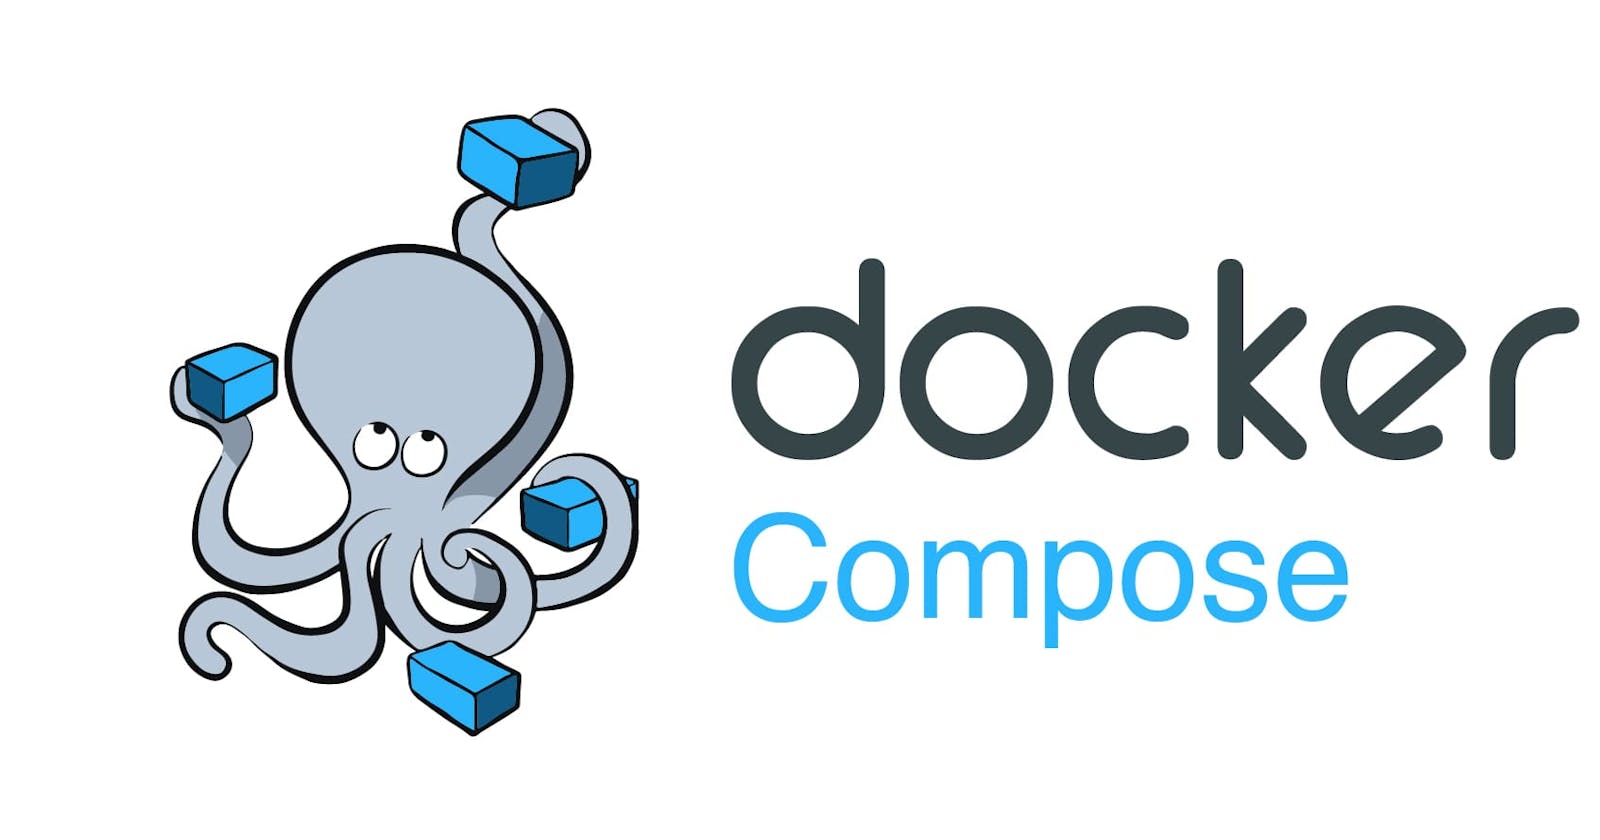 File Structure of docker-compose.yml File